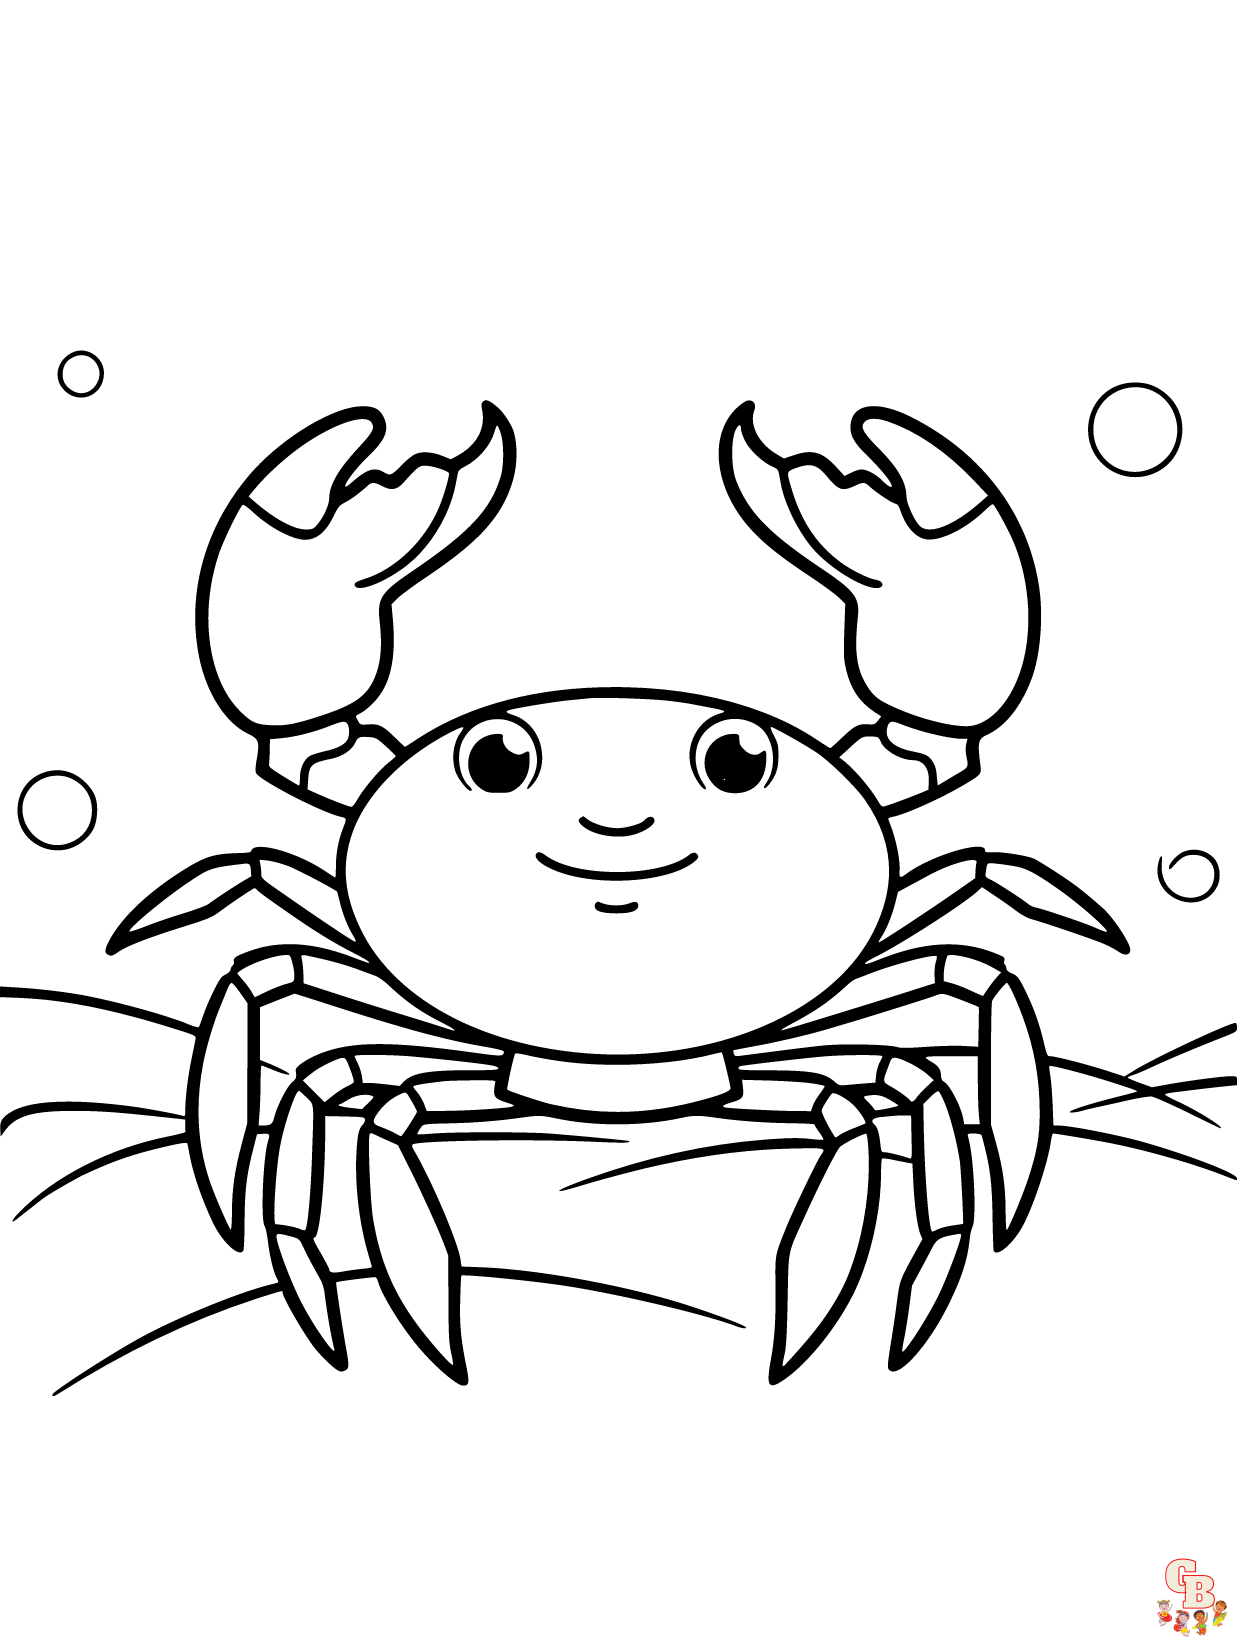 Crab coloring pages printable